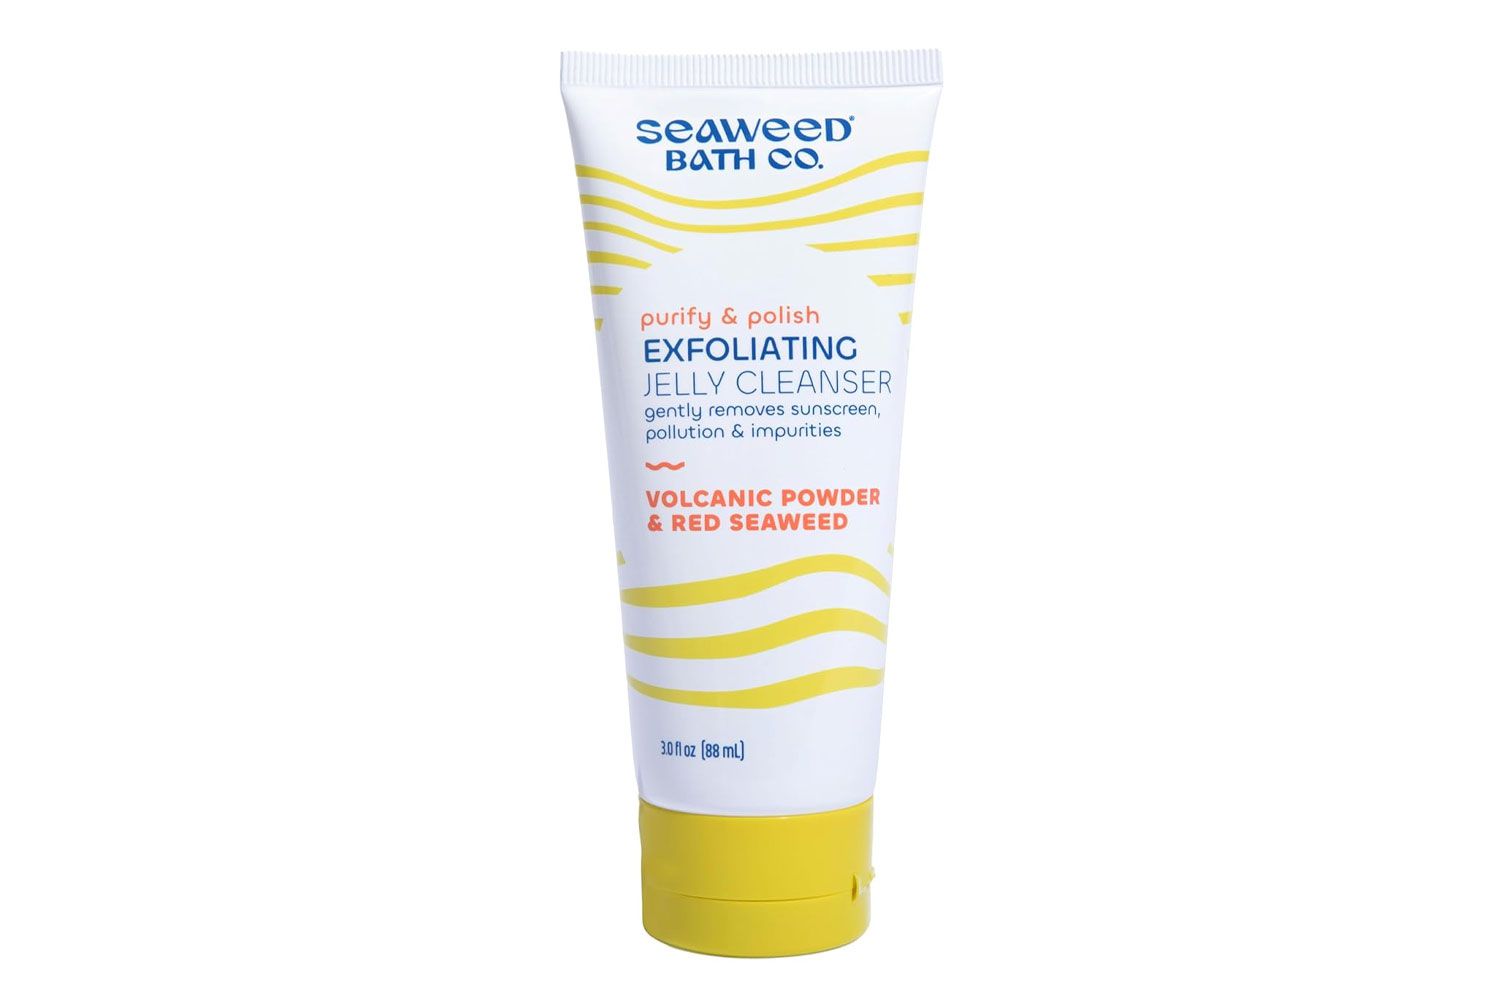 Seaweed Bath Co. Exfoliating Jelly Cleanser